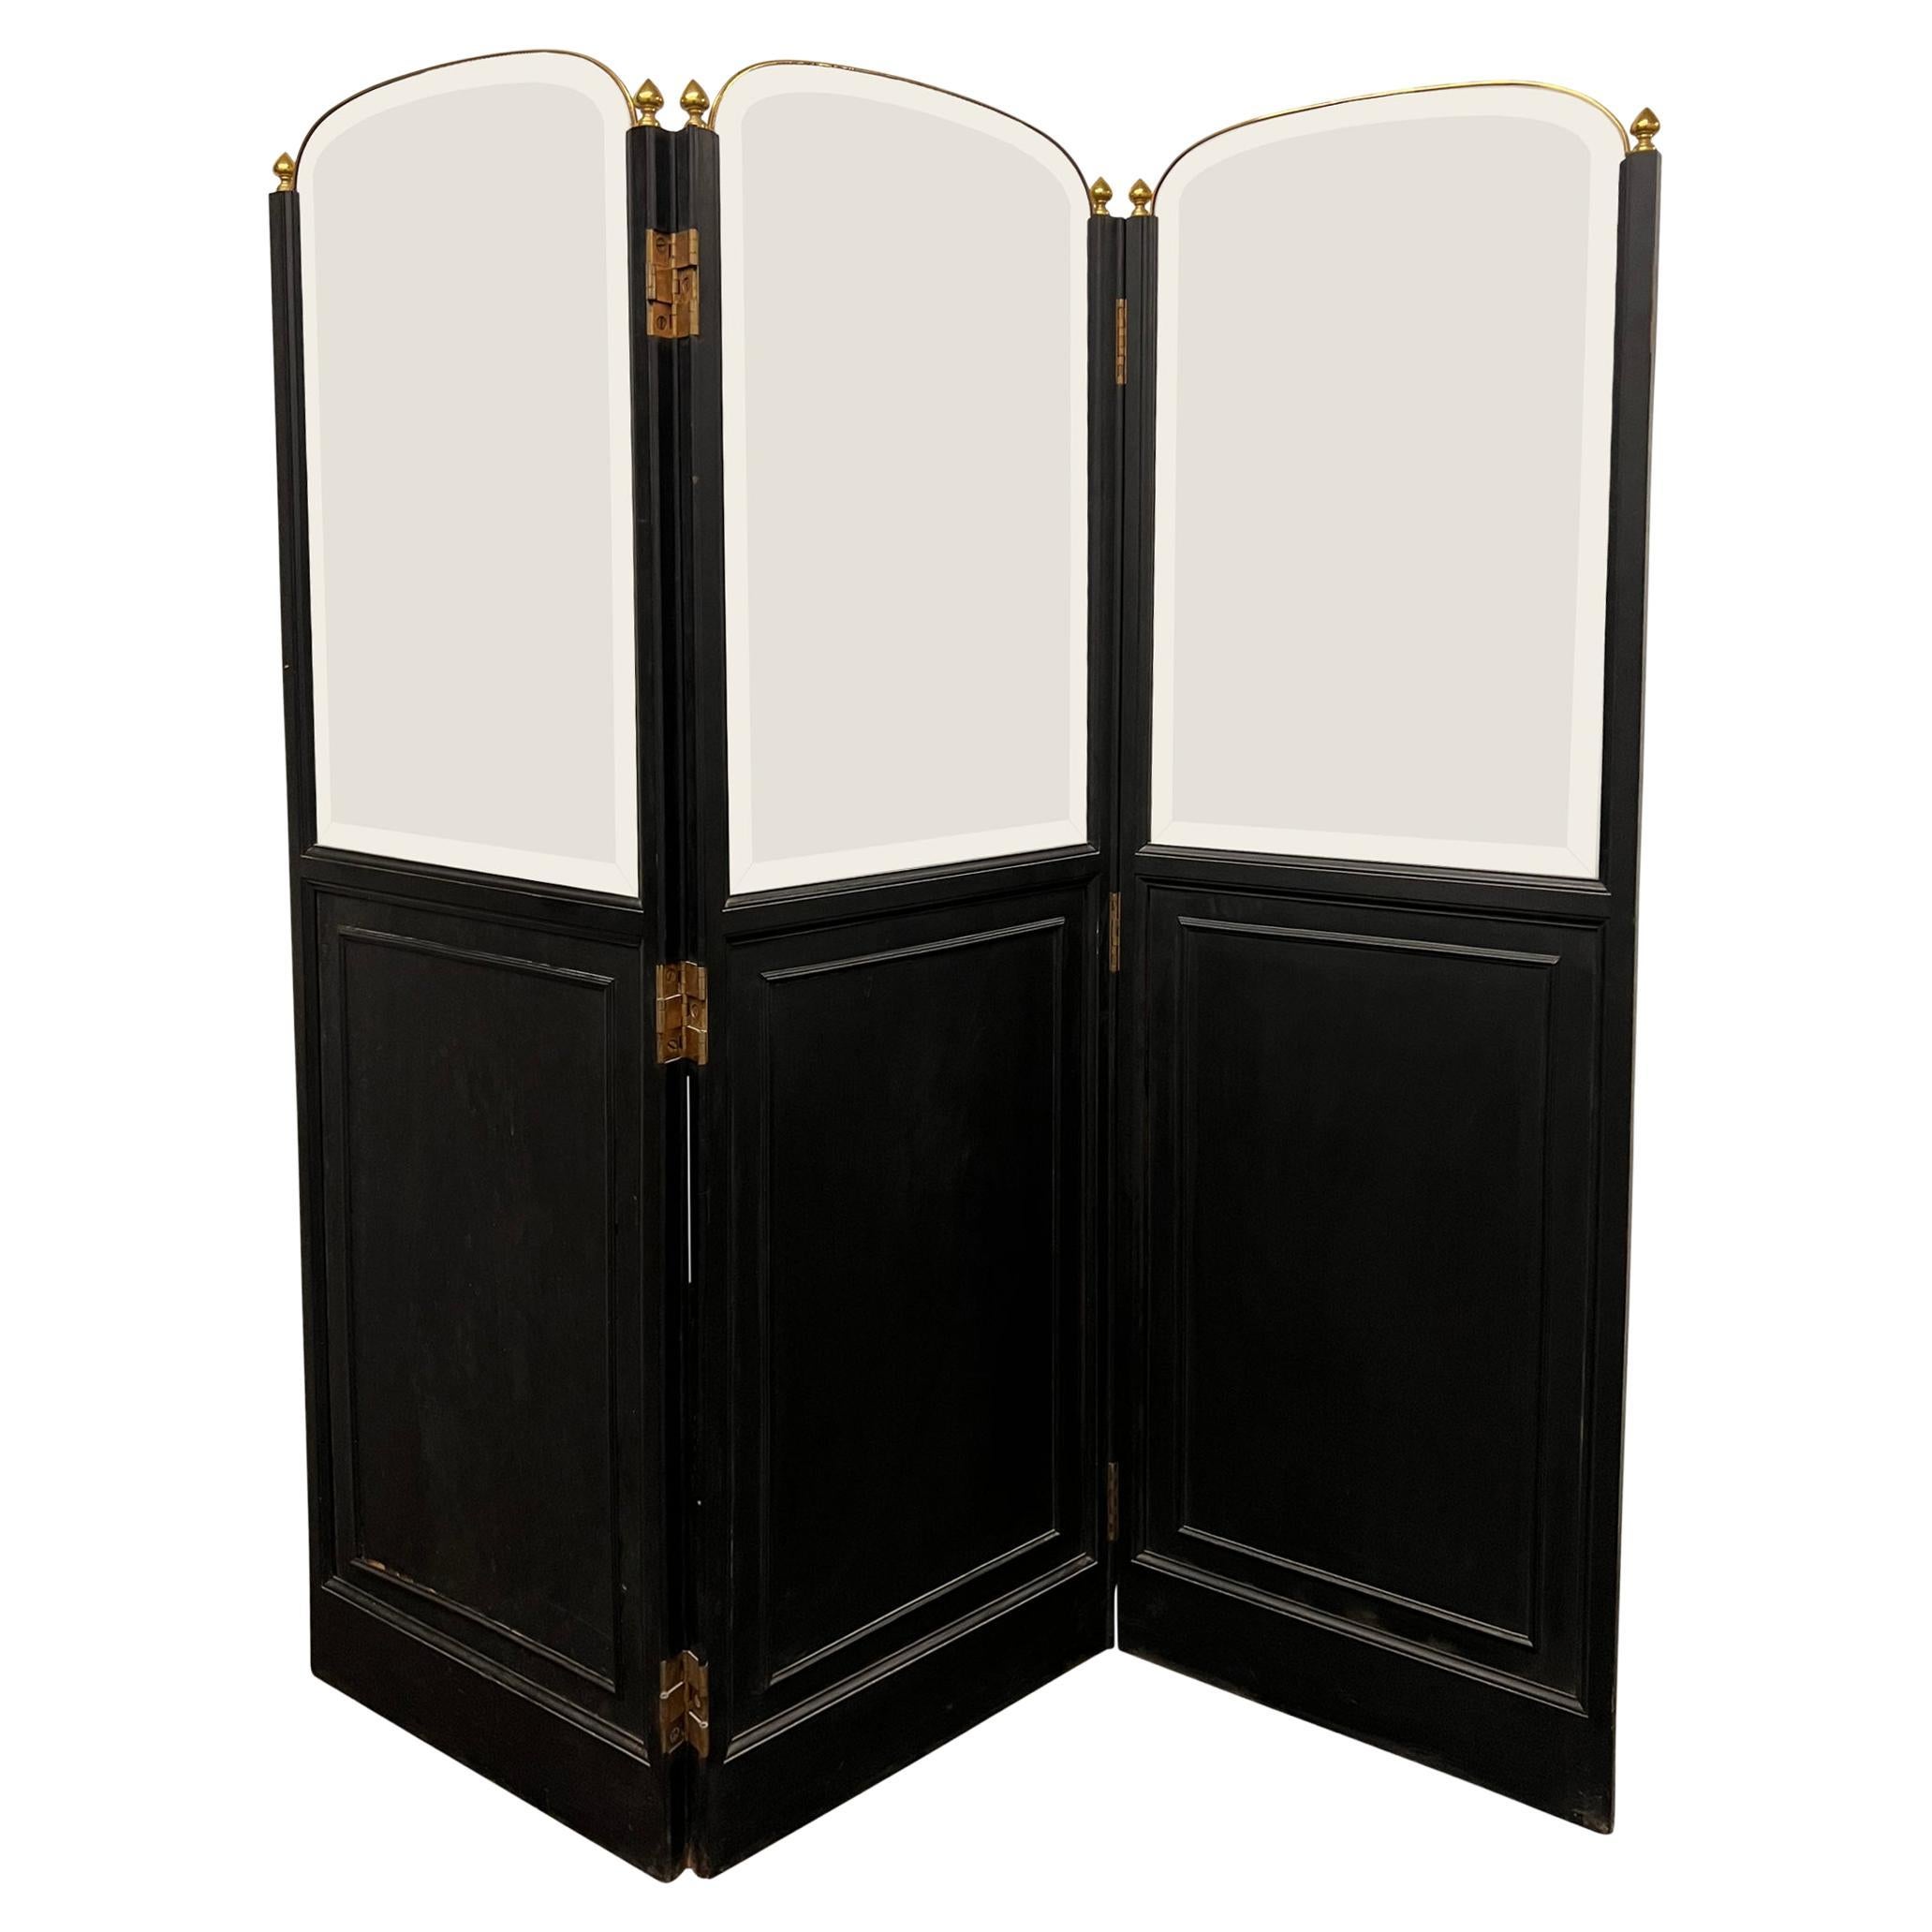 Early 20th Century French Art Nouveau Folding Screen